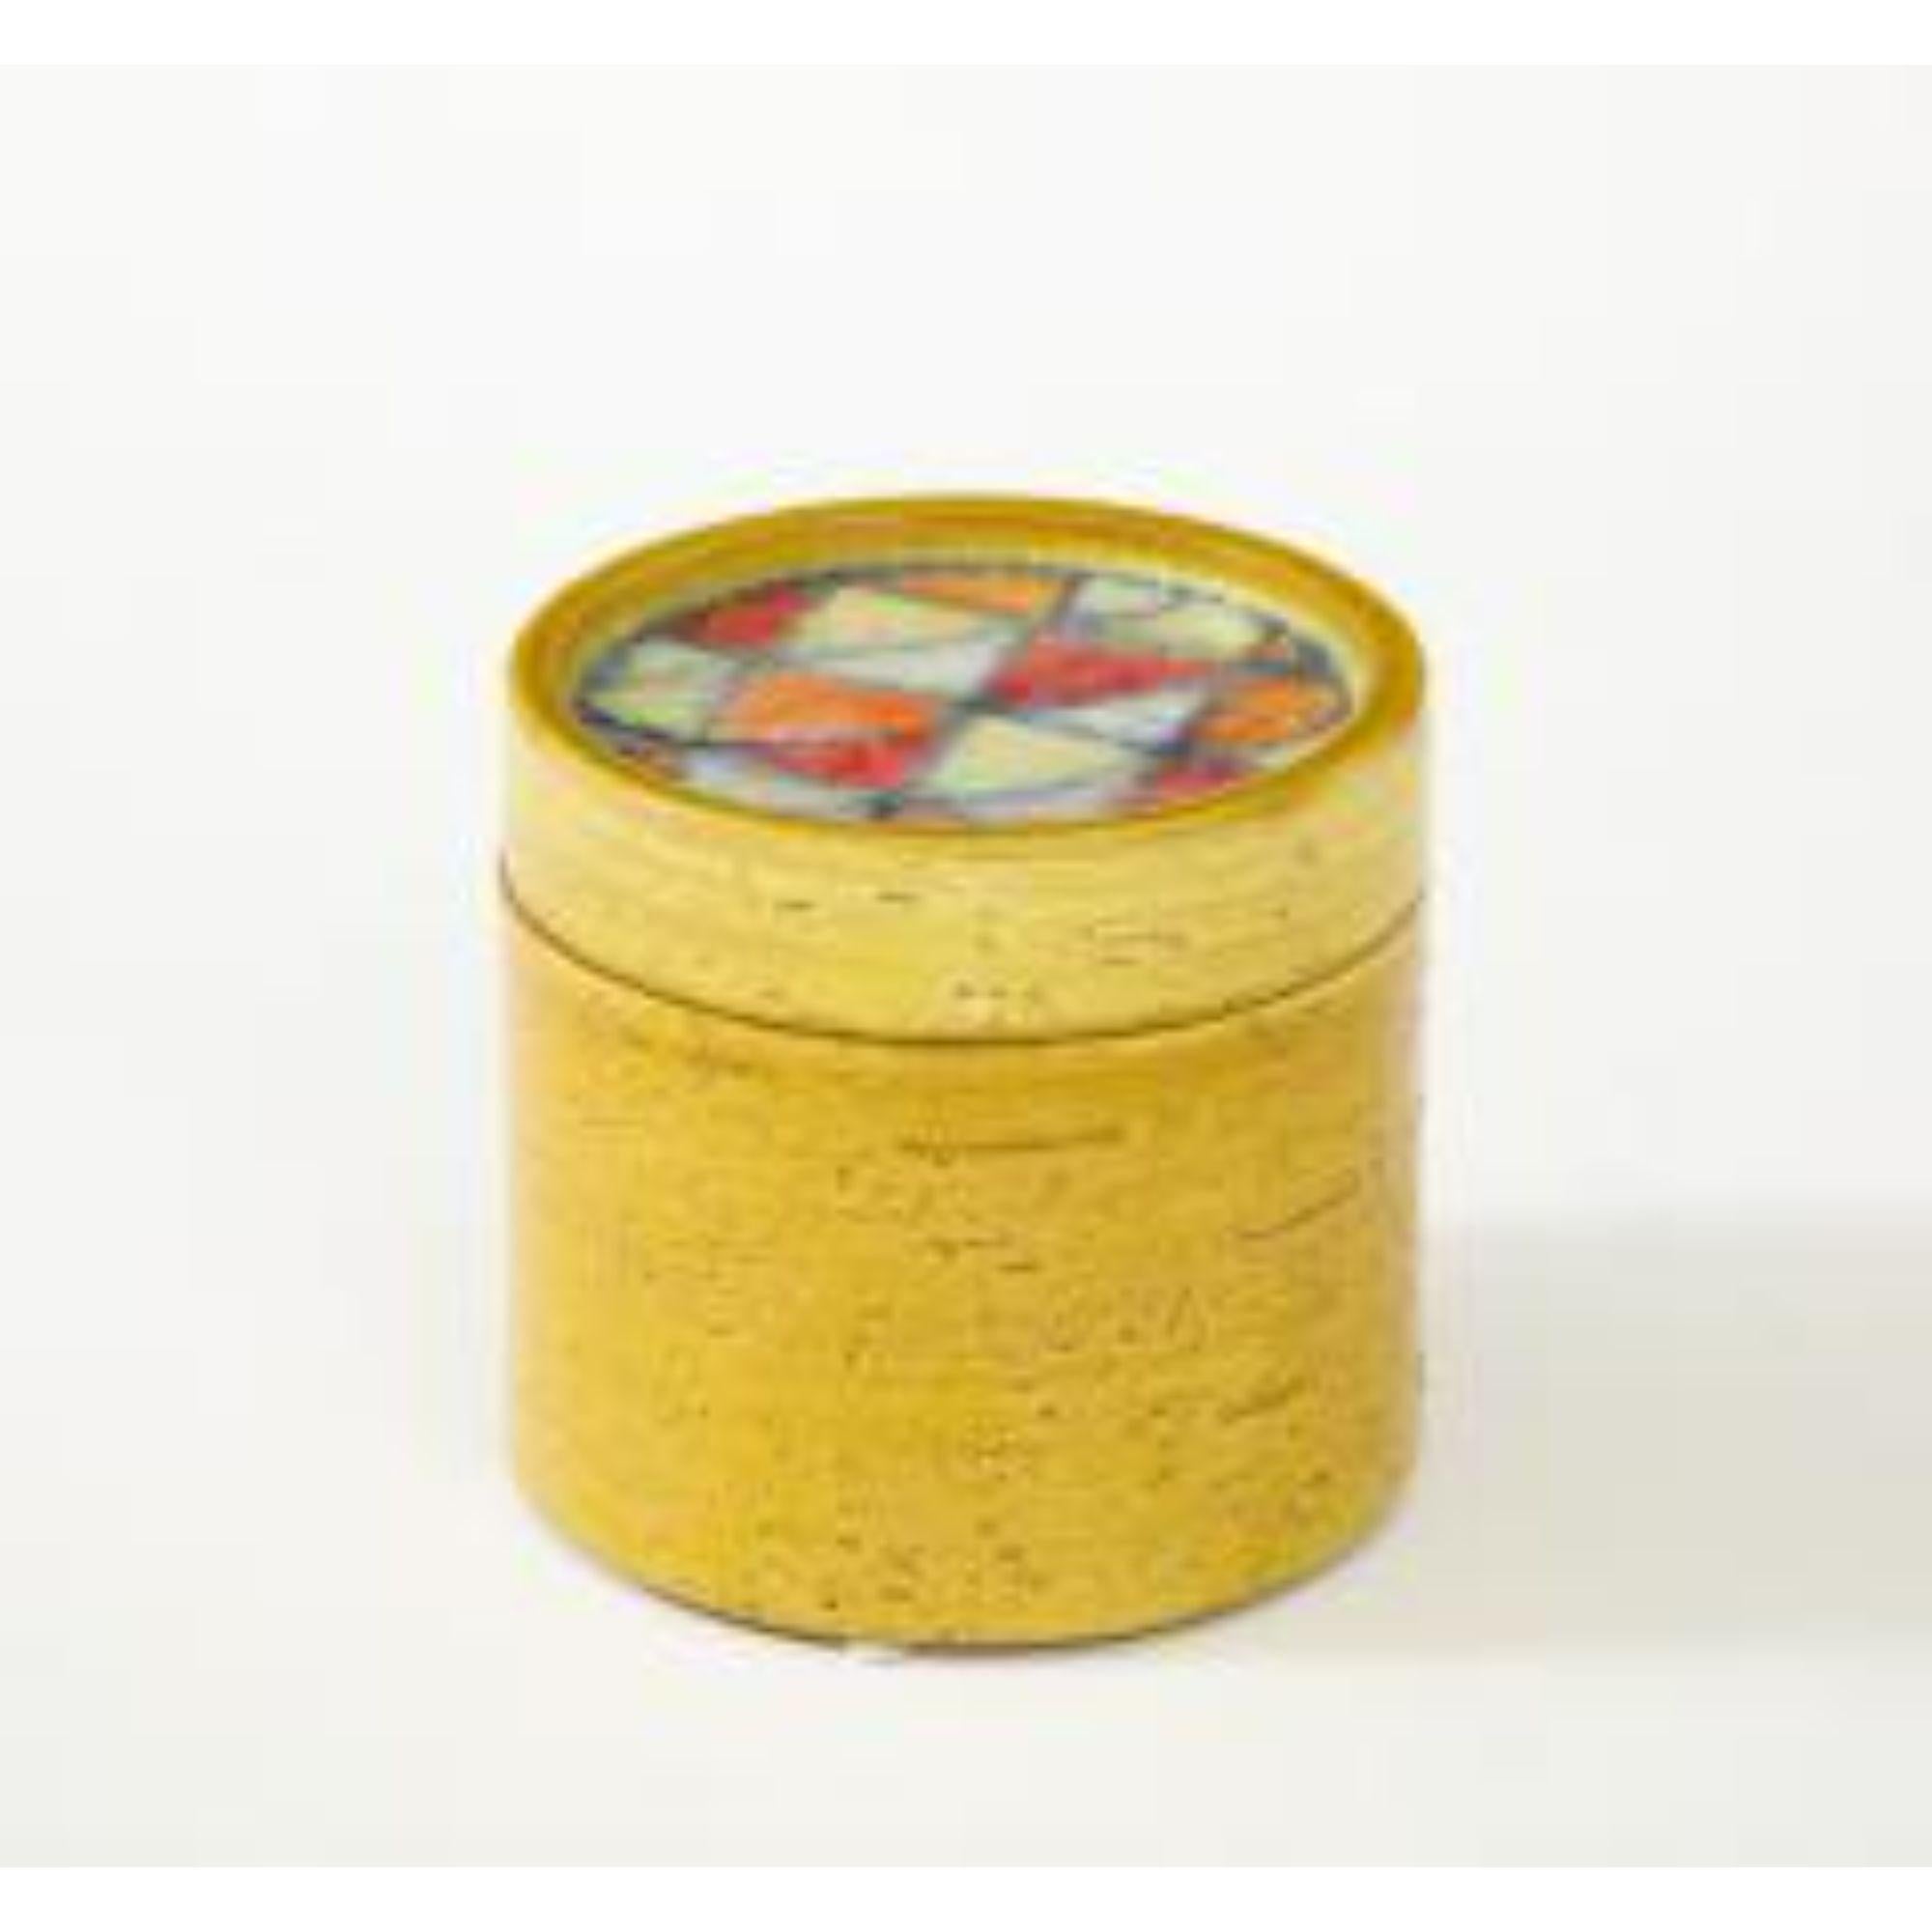 Bitossi Glazed Ceramic Lidded Box with Fused Glass Mosaic, Italy, c. 1960s

Additional Information:
Materials: Ceramic
Origin: Italy
Period: 1950-1979
Creation Date: c. 1960s
Styles / Movements: Modern
Patterns: Abstract,